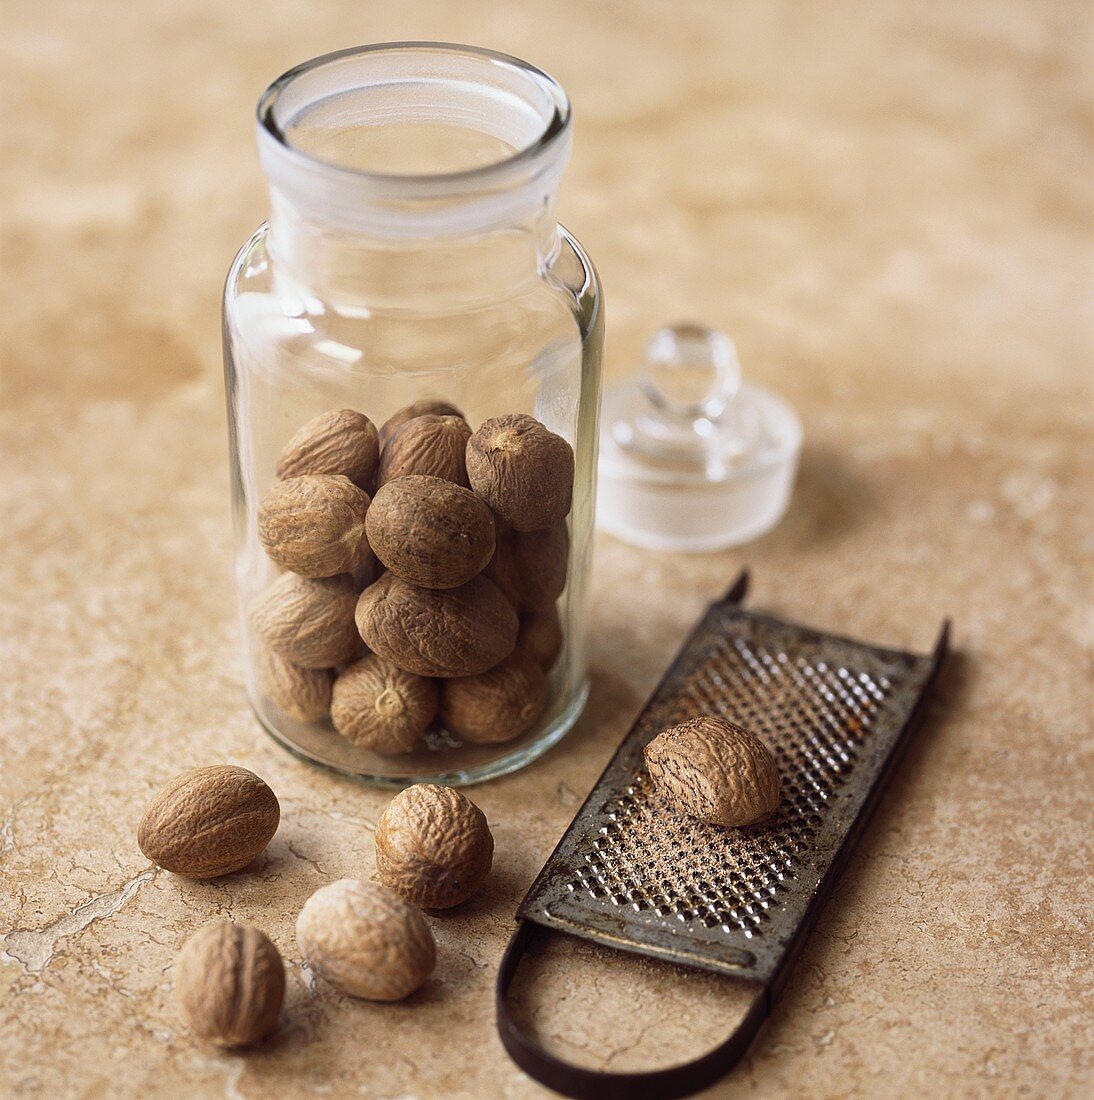 Nutmegs in a jar and on a grater